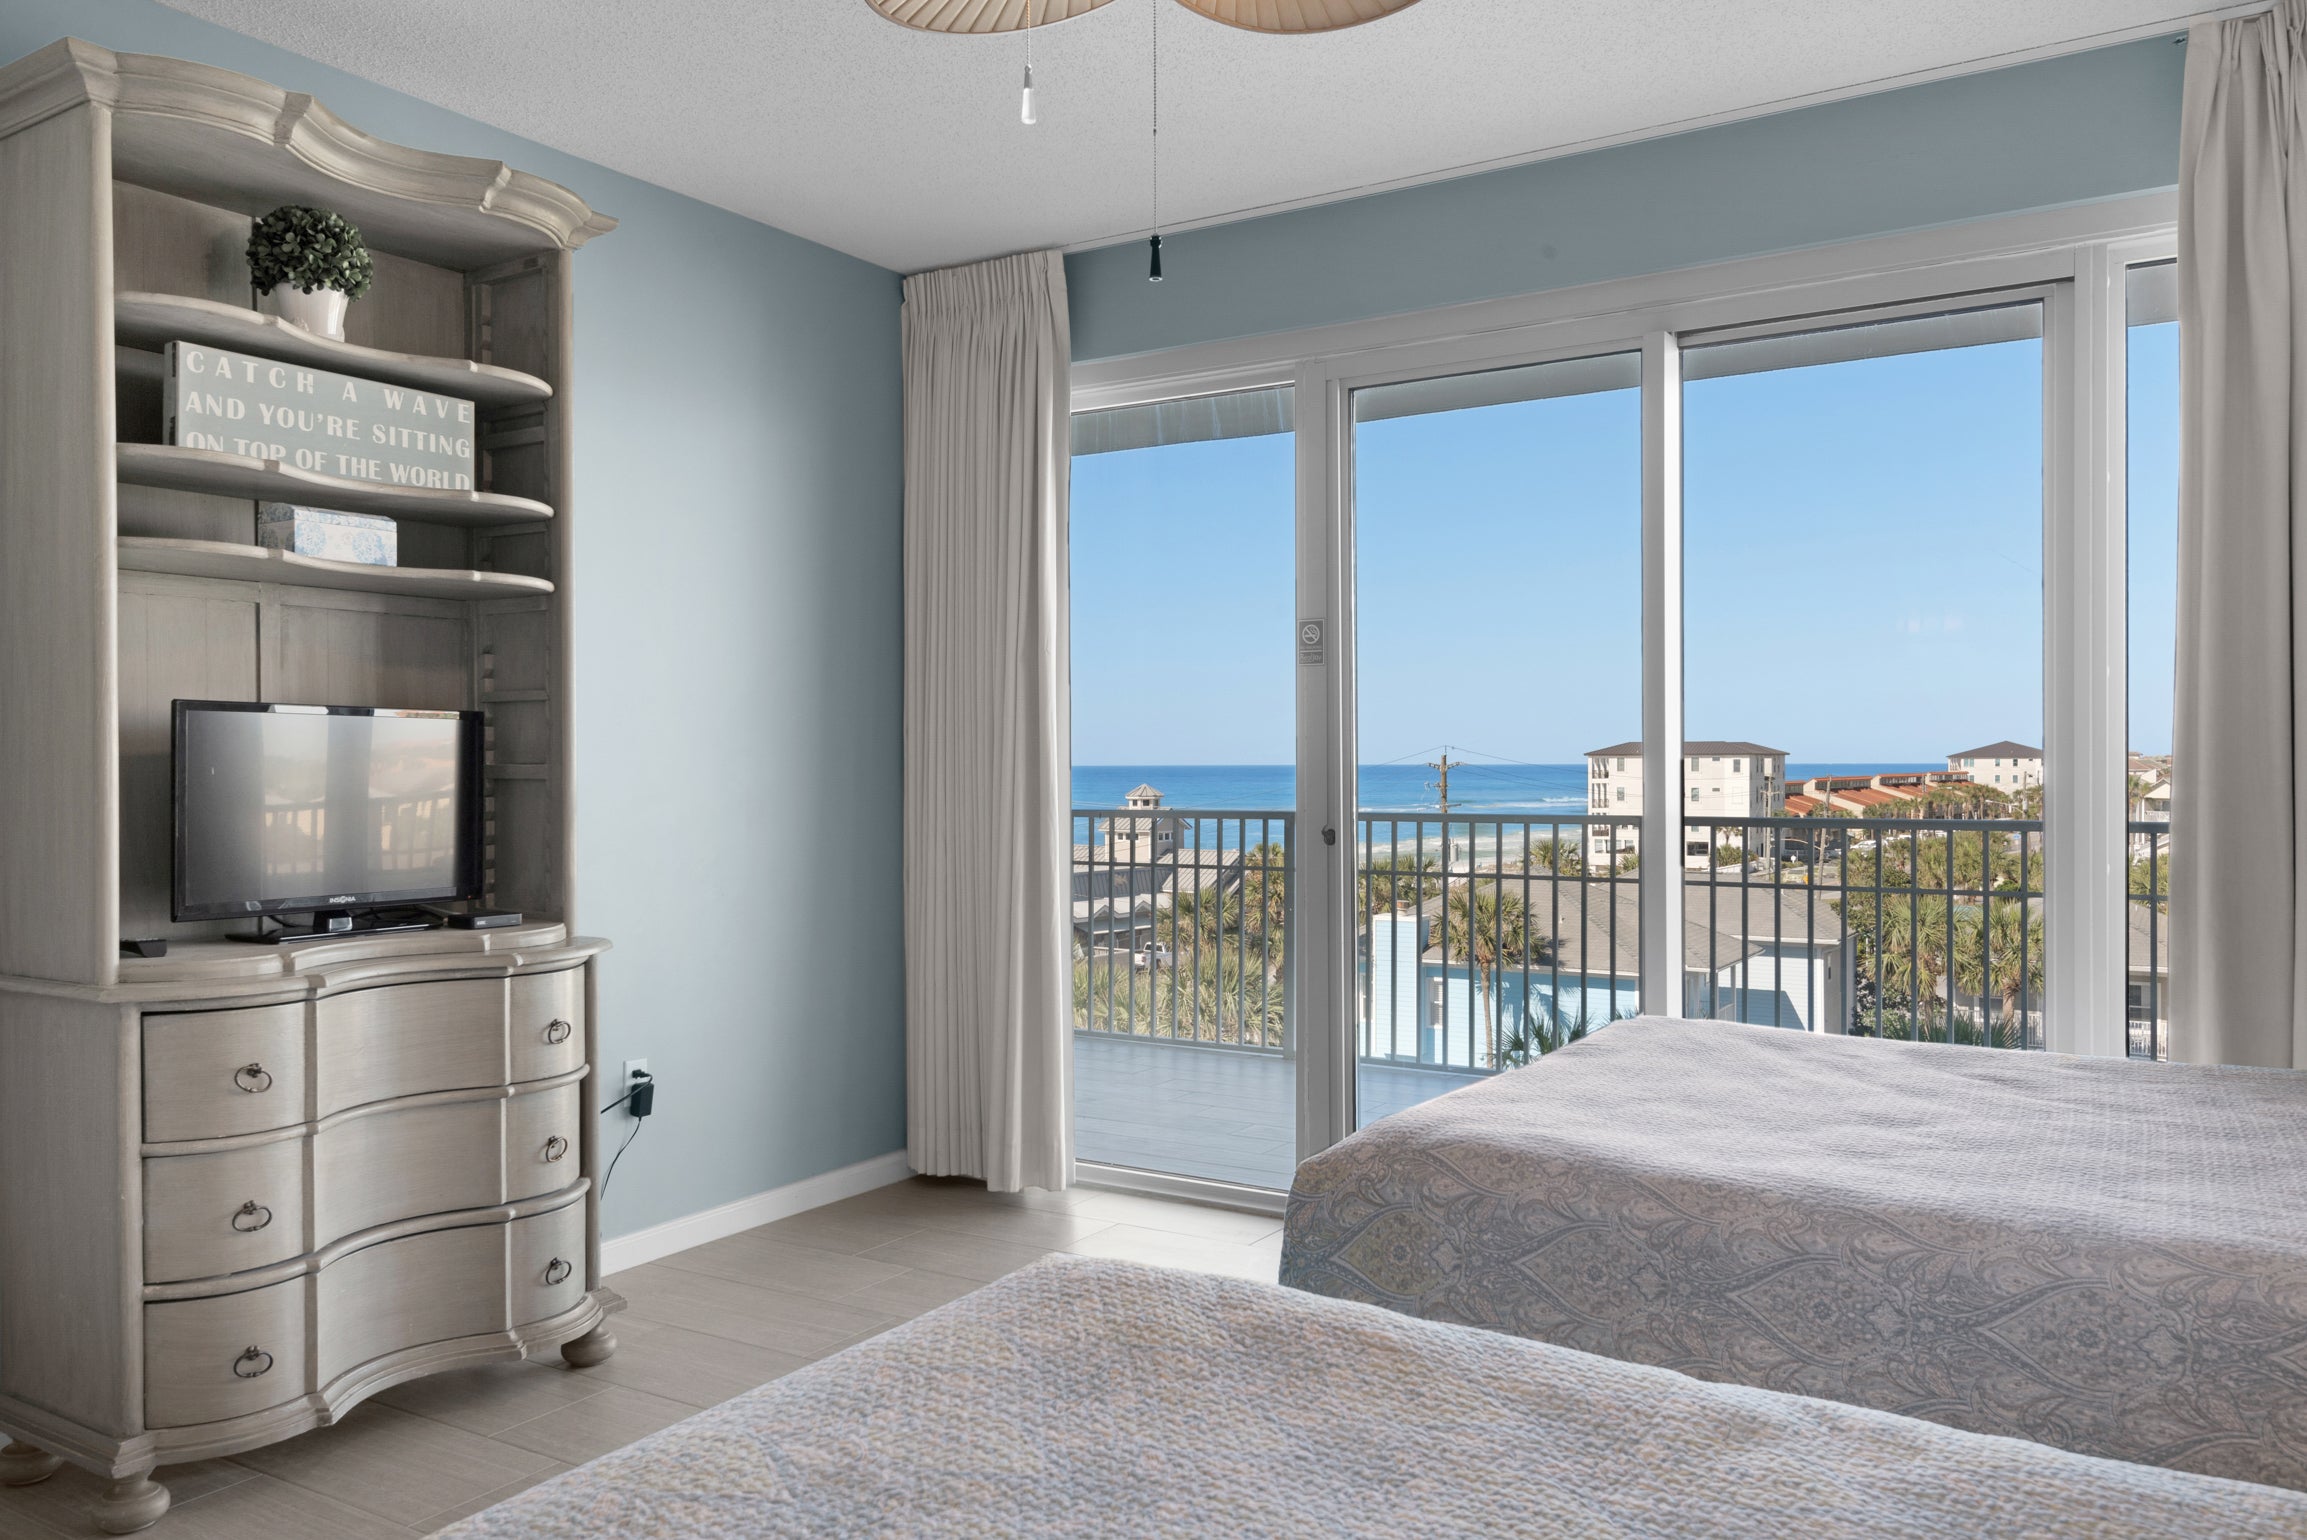 Guest bedroom with a beautiful view